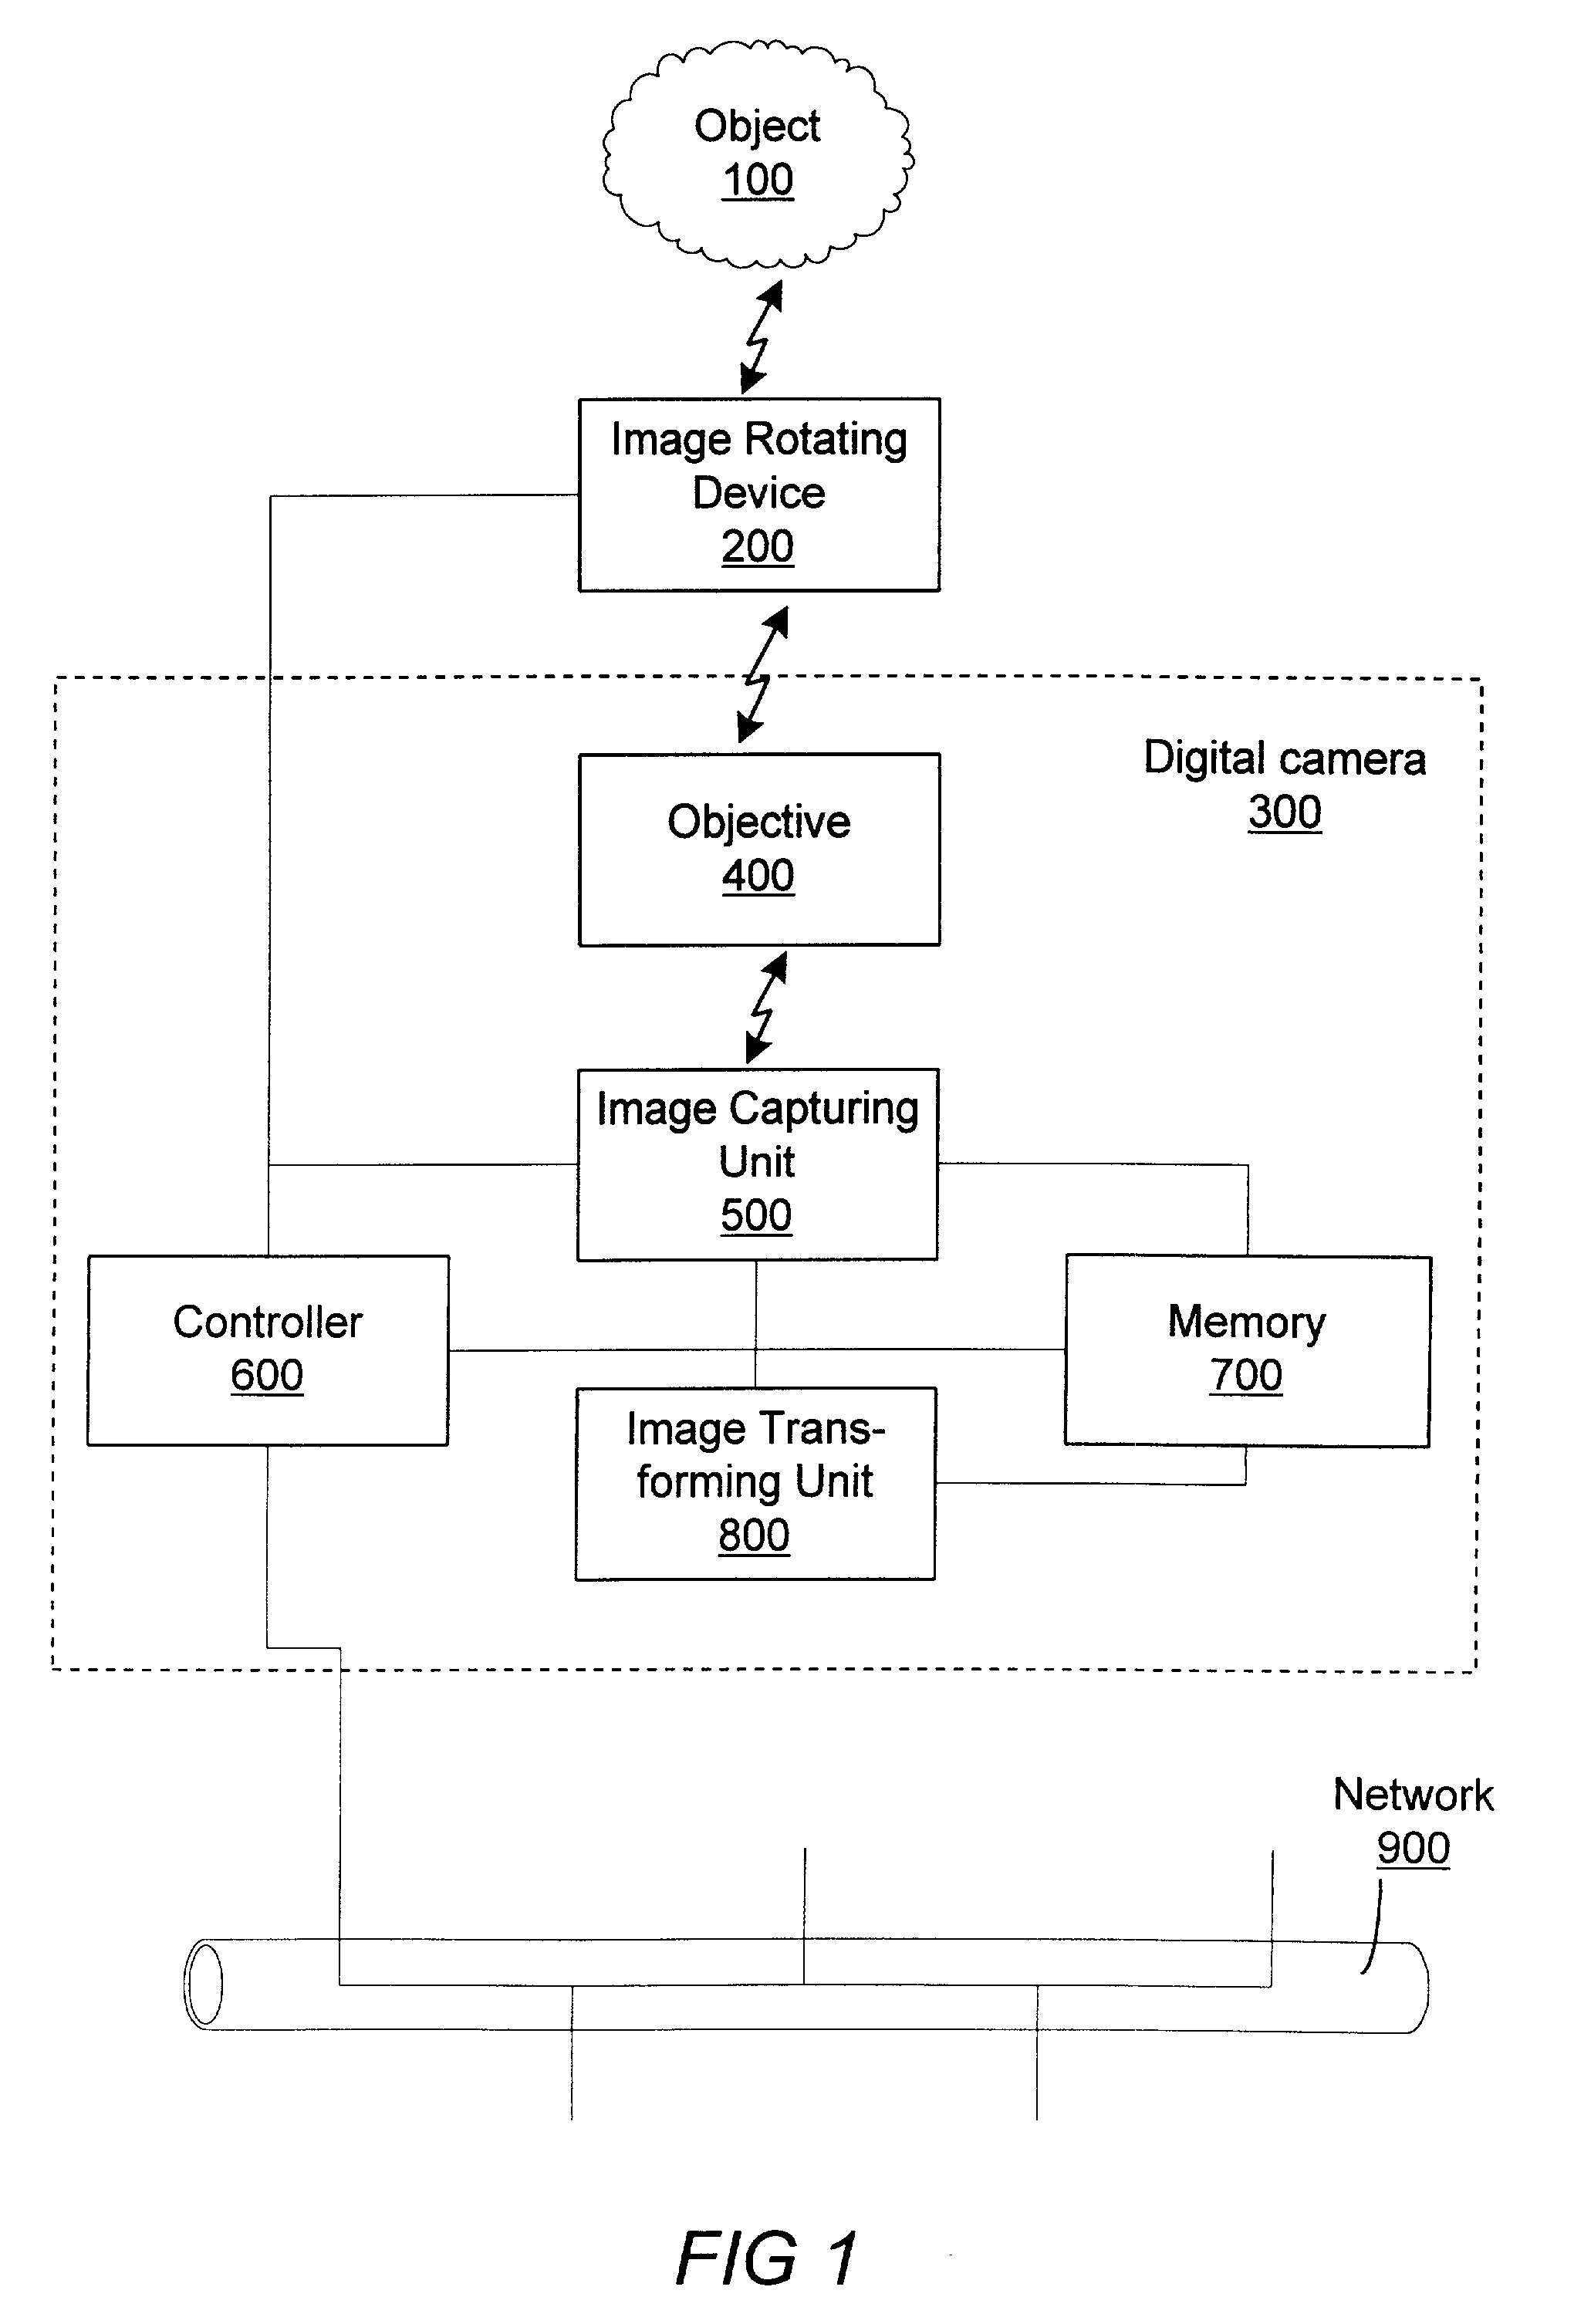 Digital camera having panning and/or tilting functionality, and an image rotating device for such a camera